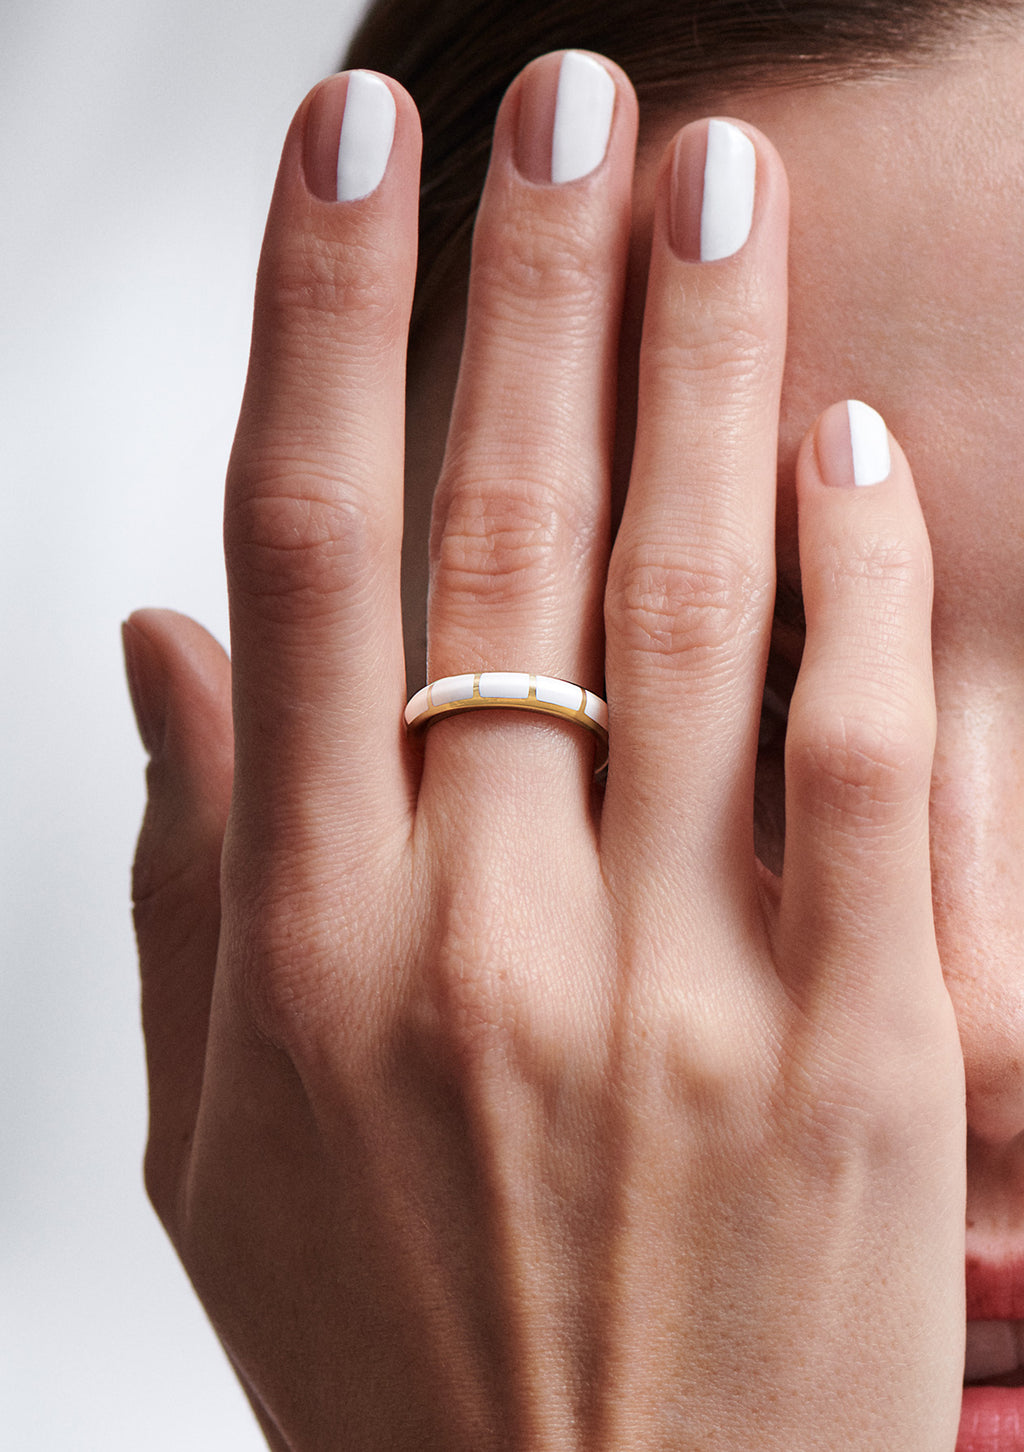 The Halo Stacking Ring